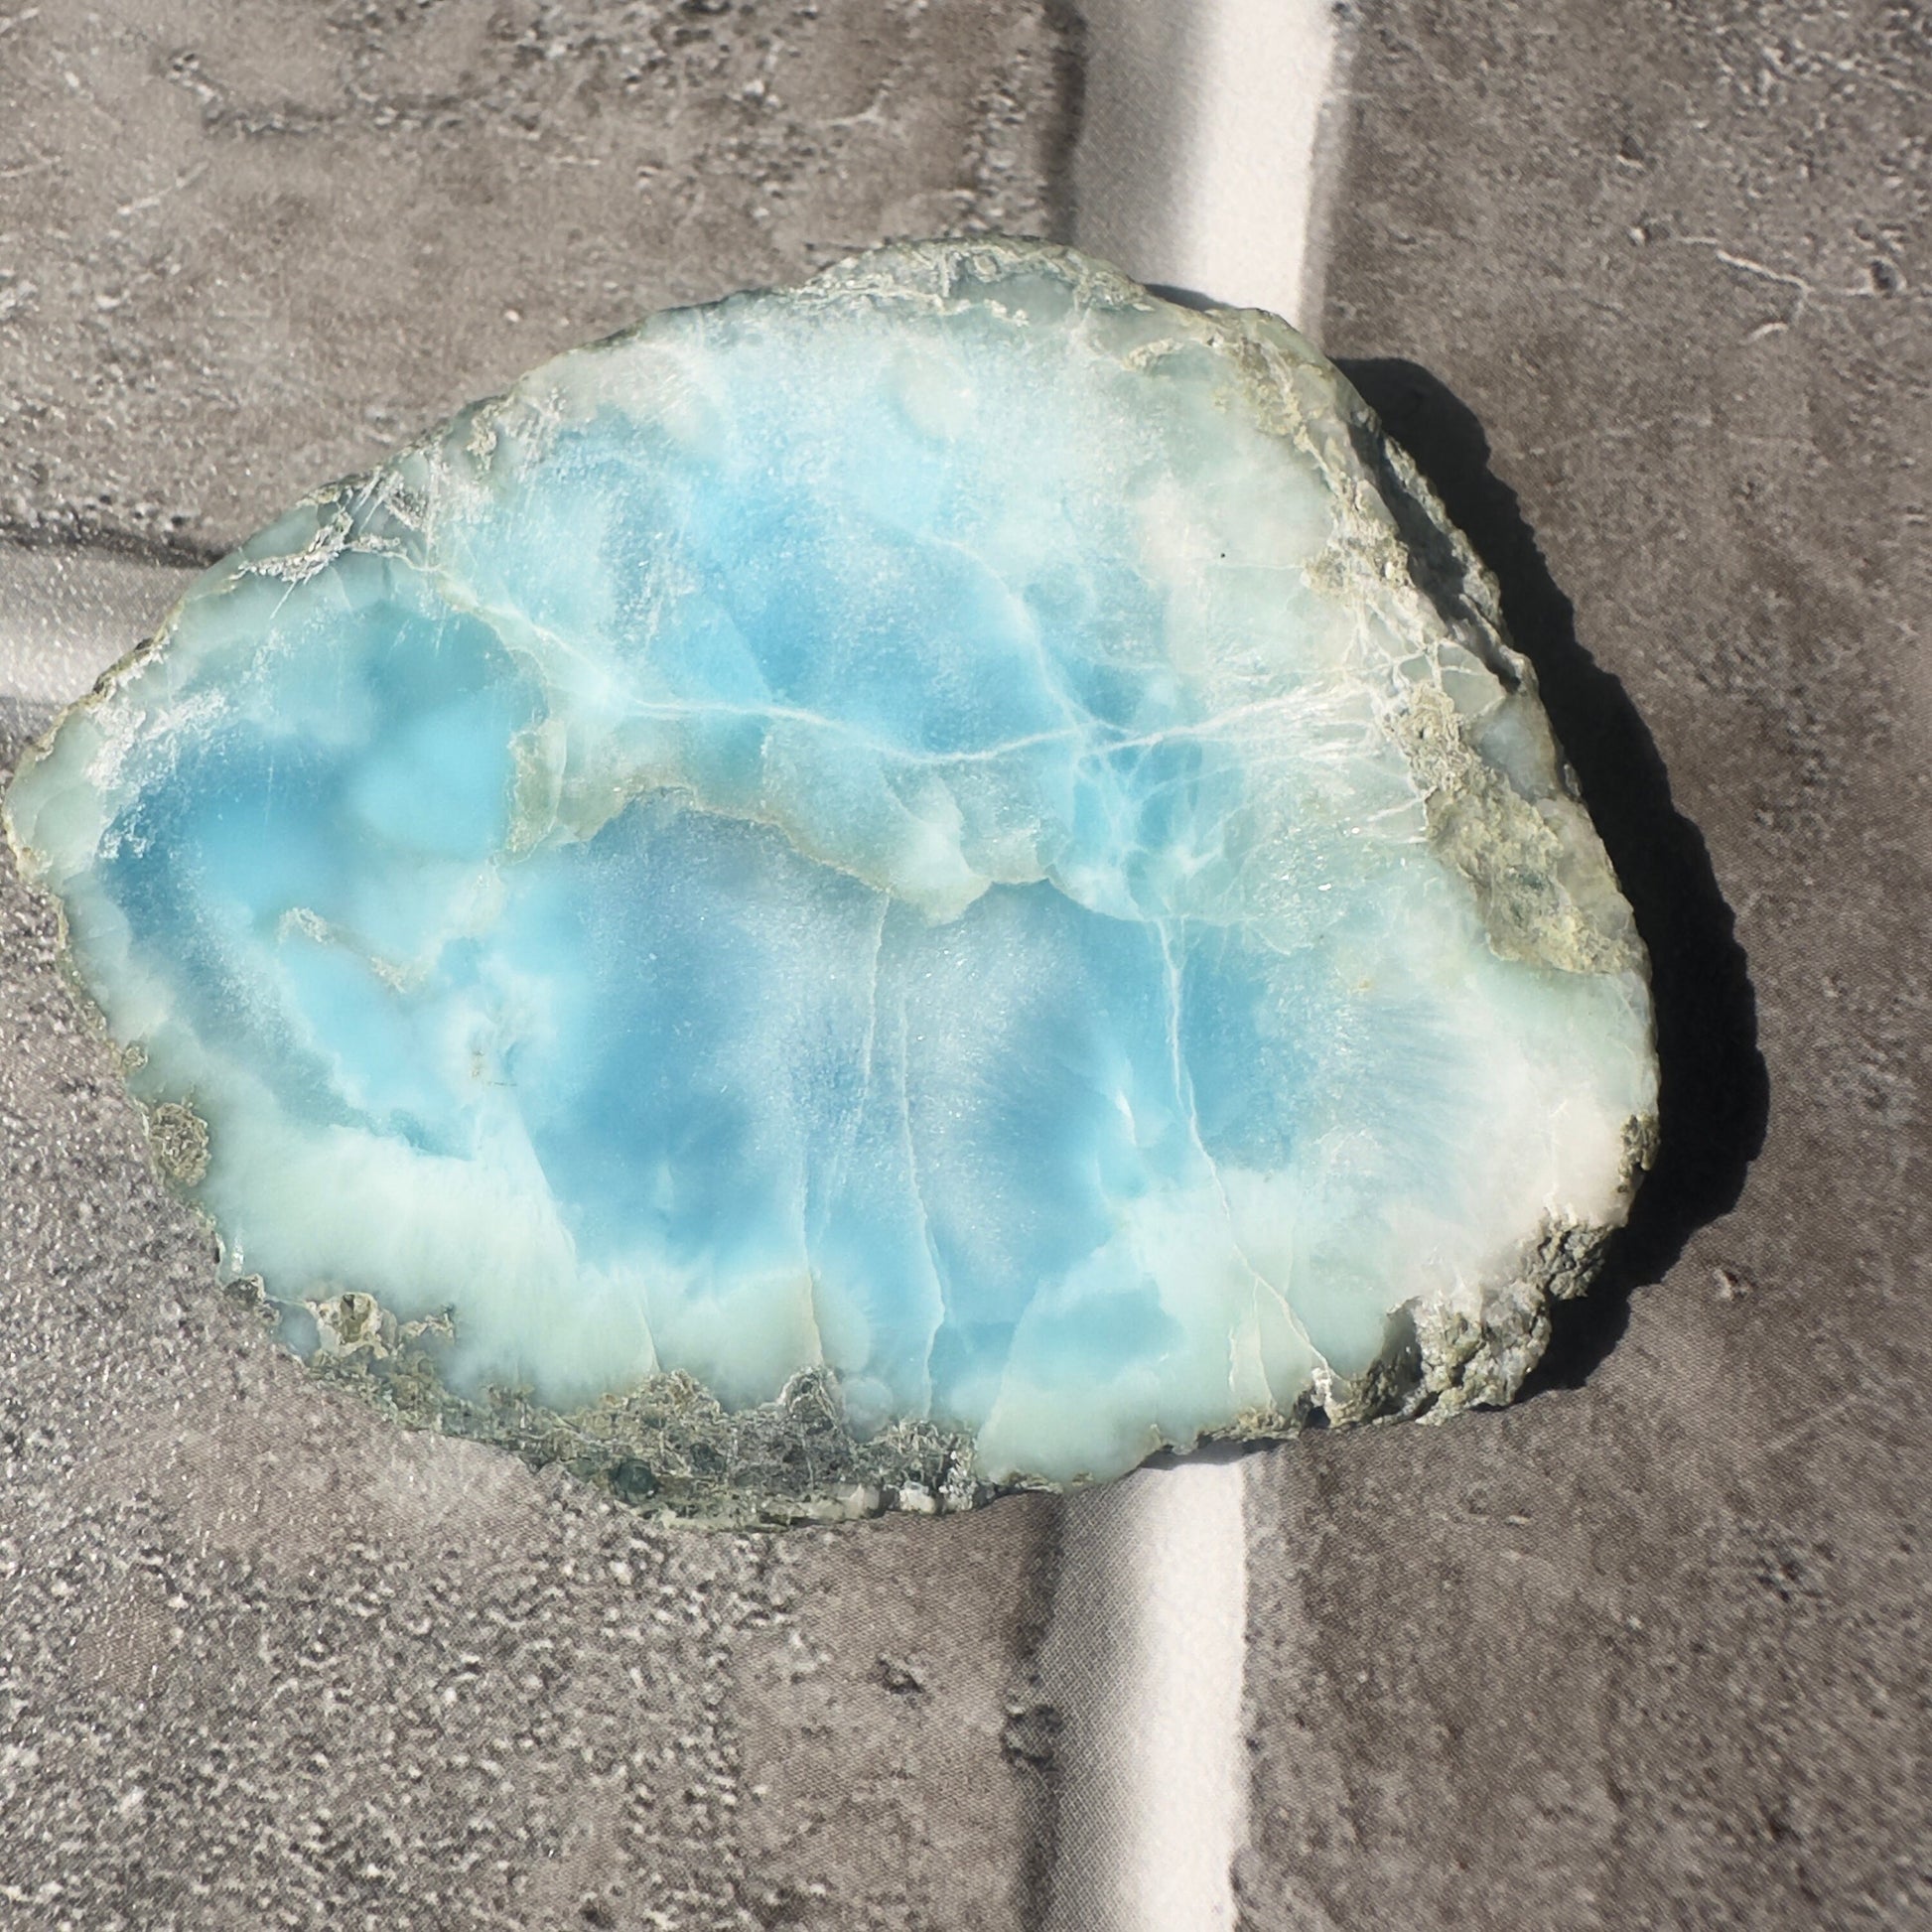 Amazing Larimar Slab High-Quality Blue Crystal Slice From The Dominican Republic | Tucson Gem Show Exclusive